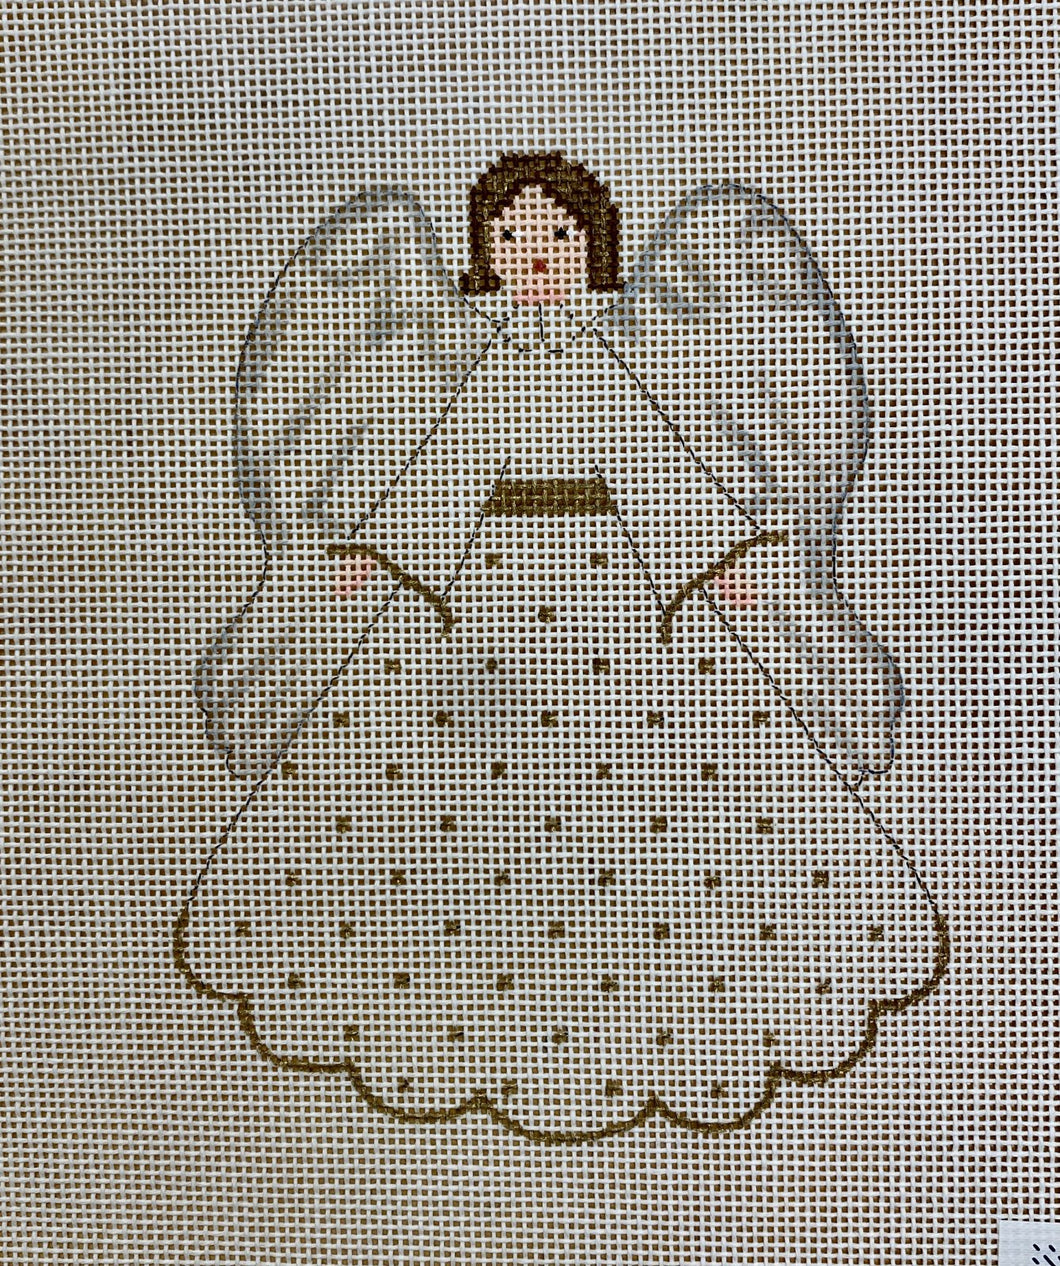 company of angels, praise with stitch guide